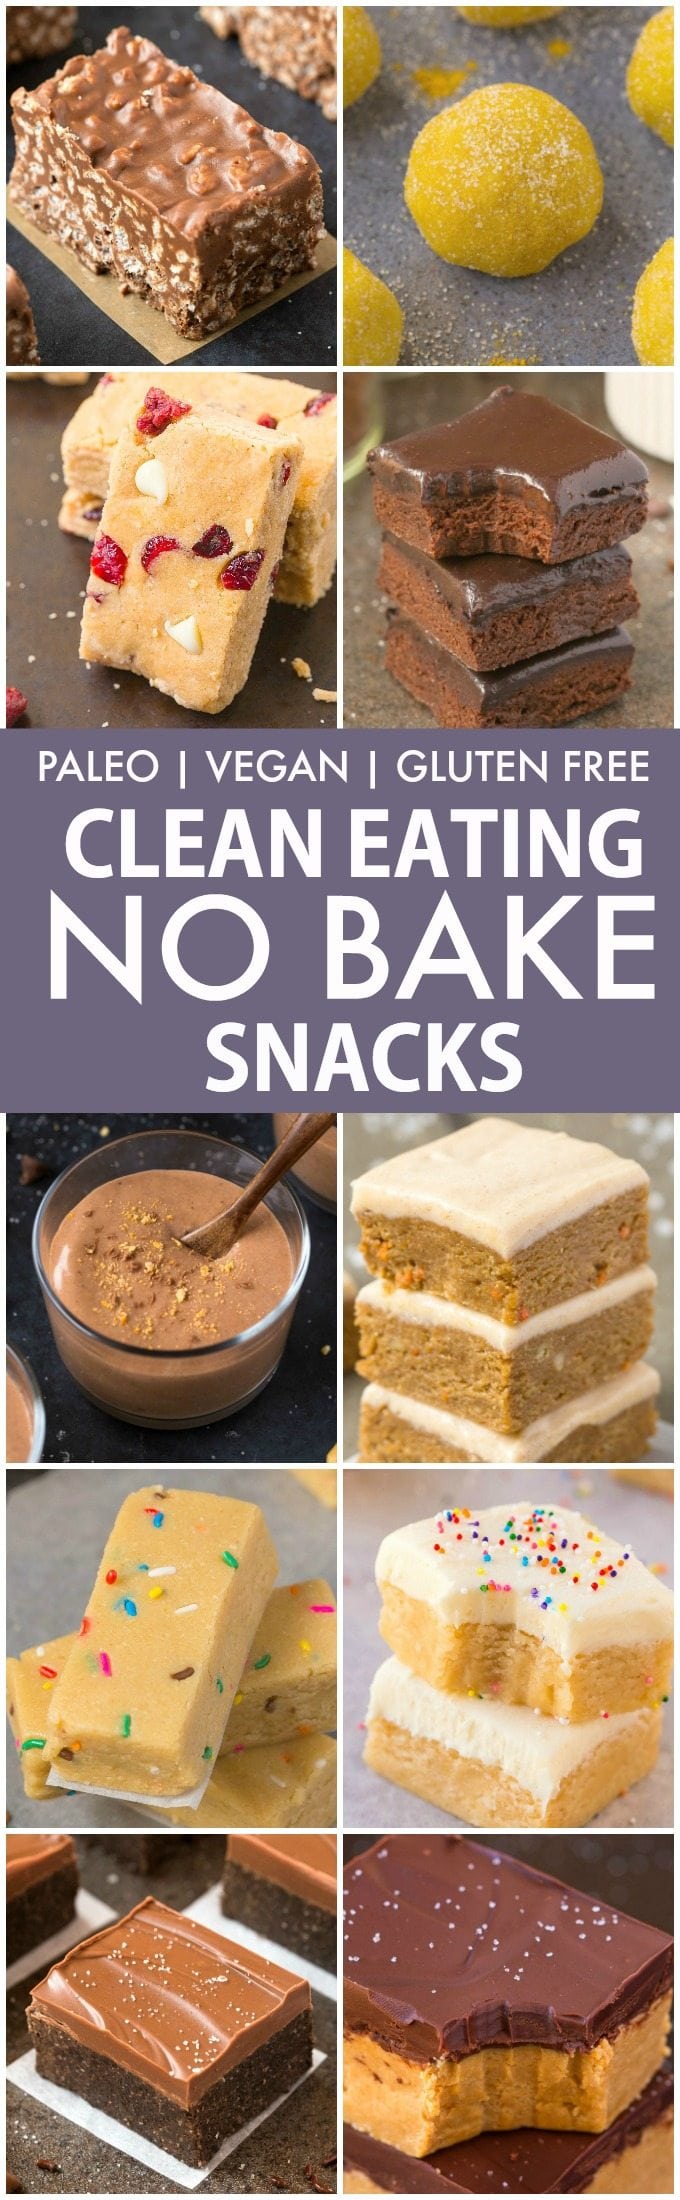 Clean Eating Healthy No Bake Snacks (V, GF, P, DF)- Quick, easy and healthy no bake snacks which take minutes and are protein packed + sugar free! {vegan, gluten free, paleo recipe}- thebigmansworld.com